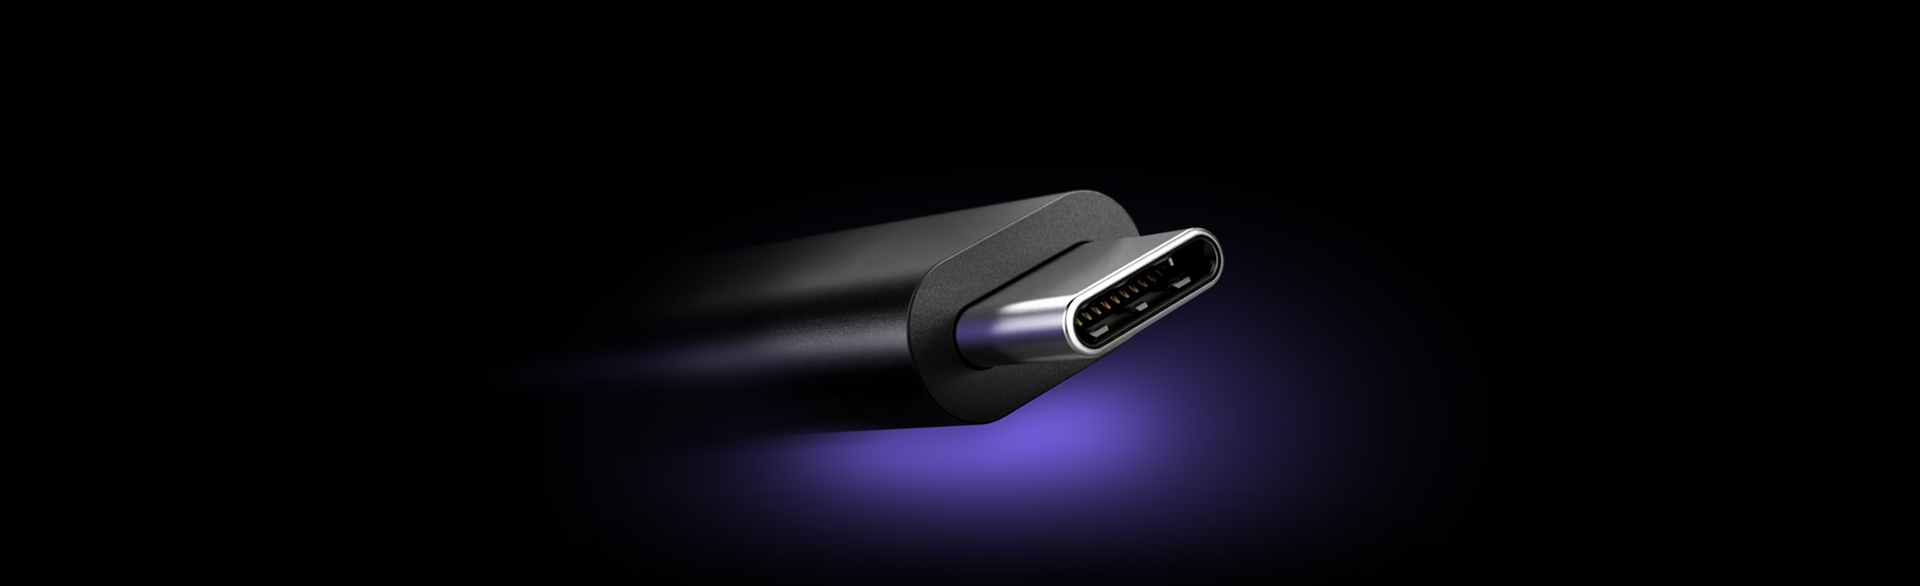 The image shows the USB C connector.